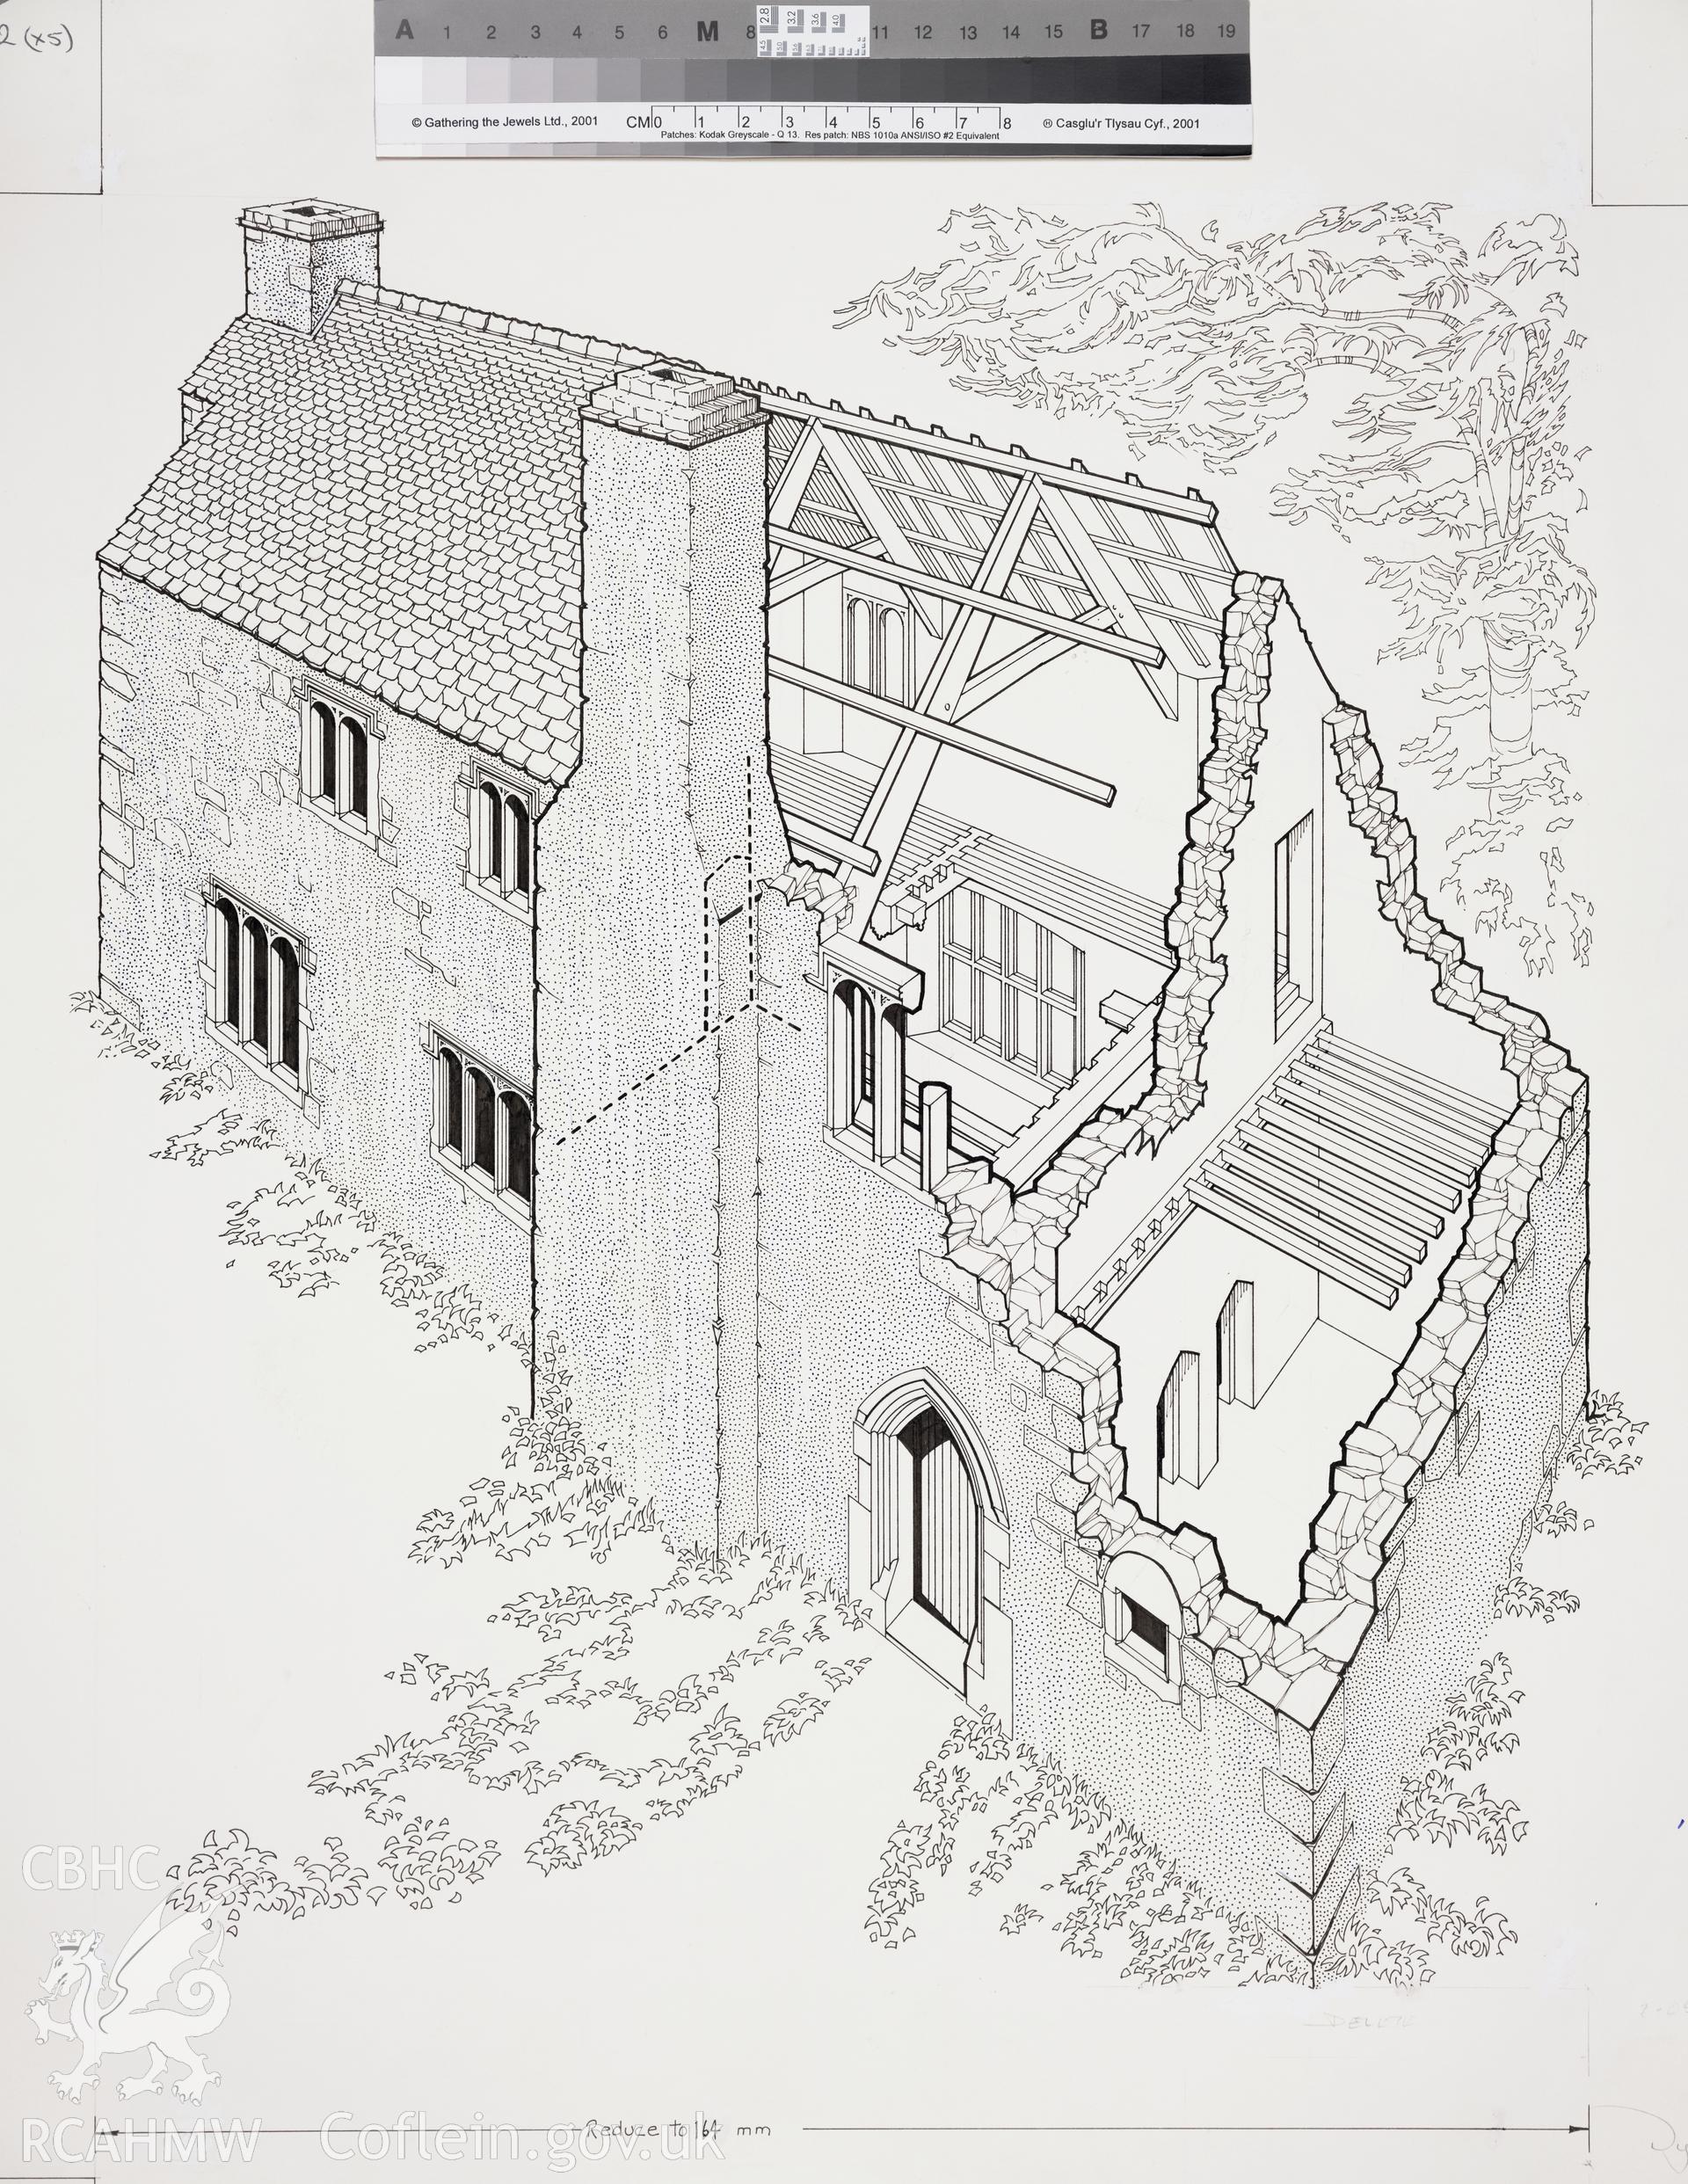 RCAHMW drawing showing cutaway view of Flemingston Court, published in Houses of the Welsh Countryside, fig 89 and Glamorgan Greater Houses, Fig 39